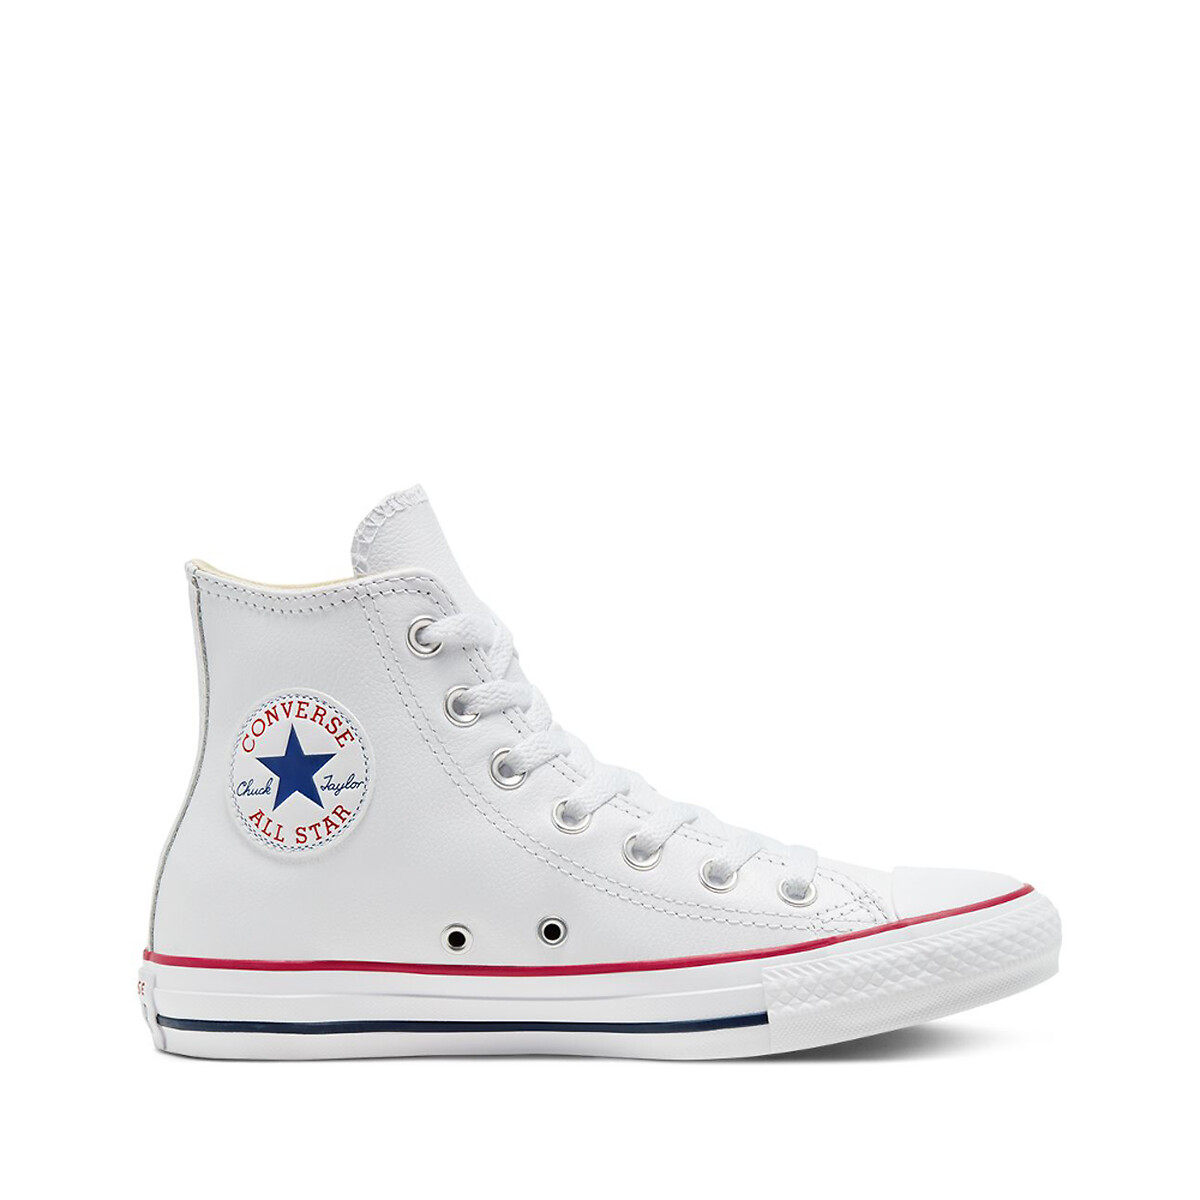 Image of Chuck Taylor All Star Leather High Top Trainers